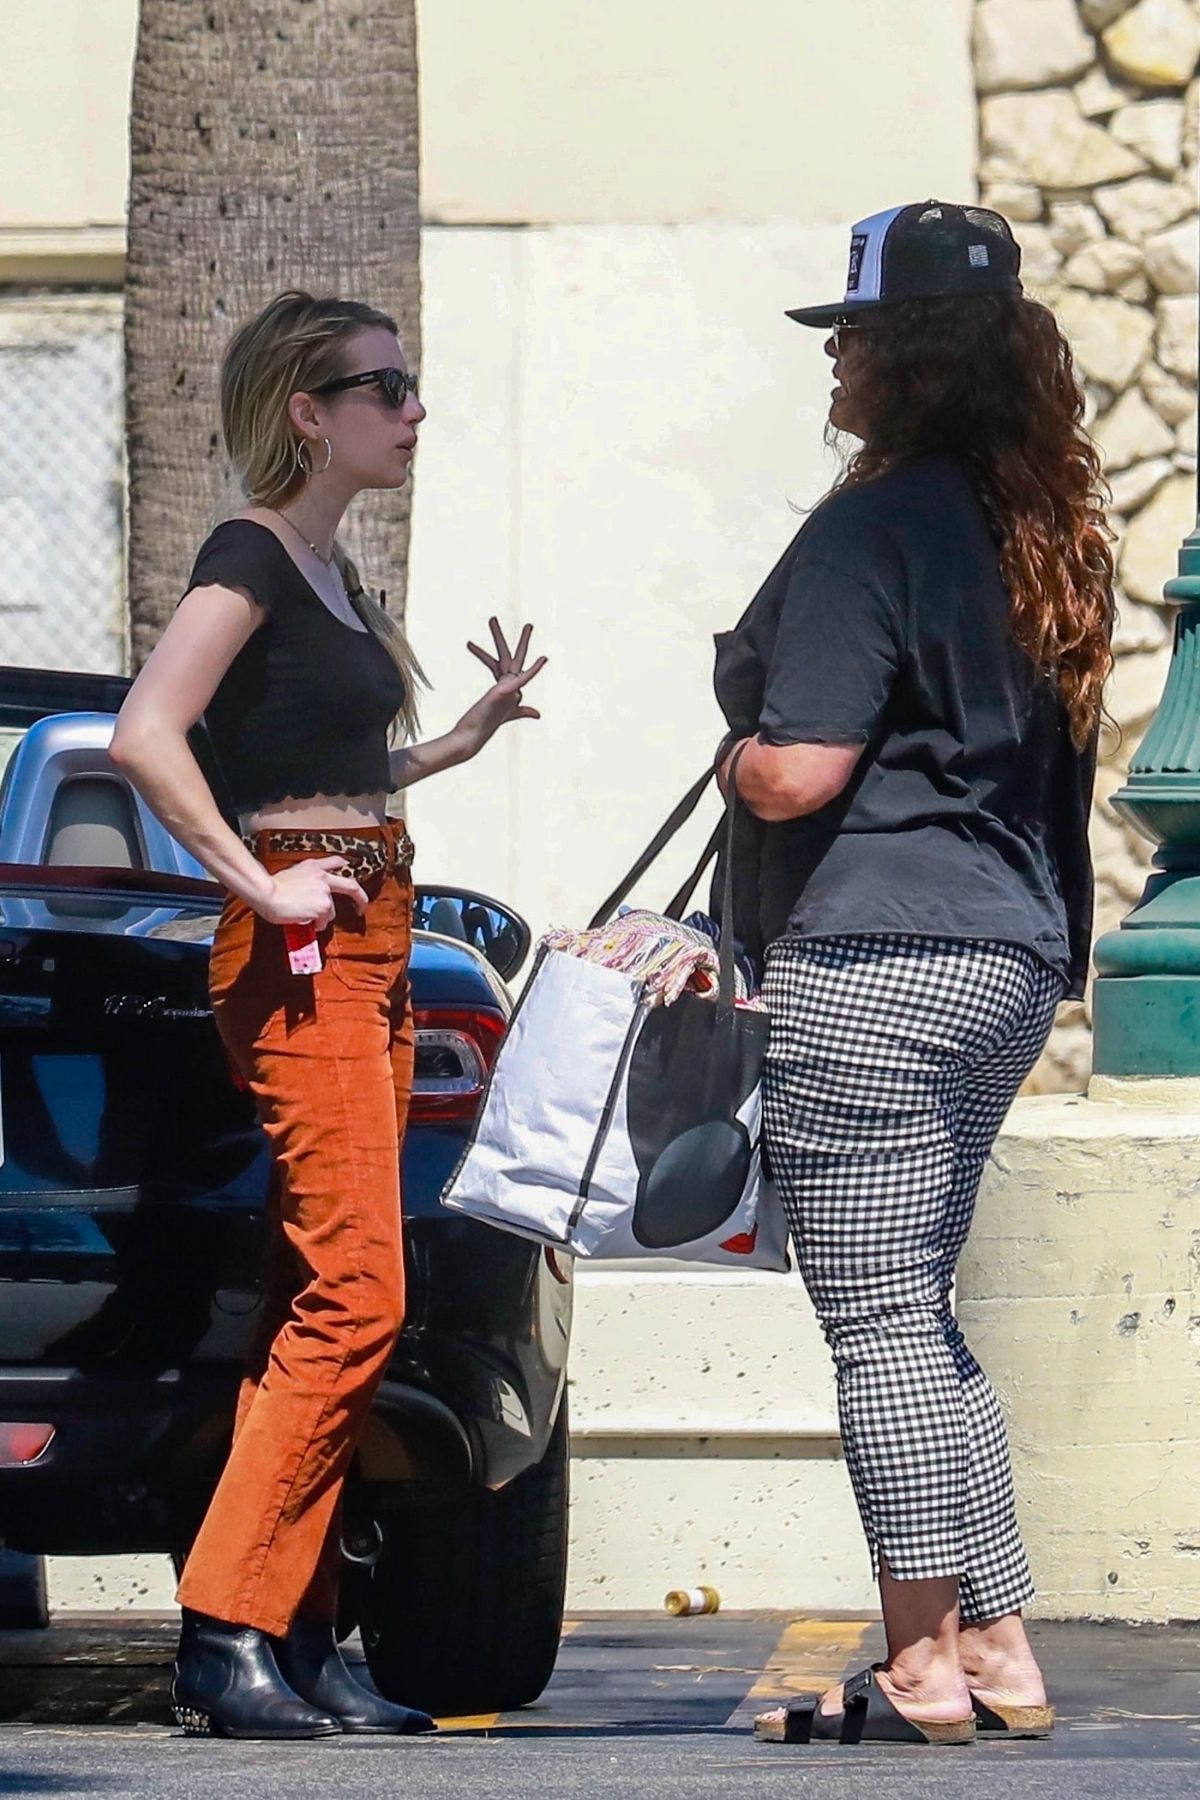 EMMA ROBERTS at a Parking Lot in Los Angeles 09/15/2018 – HawtCelebs